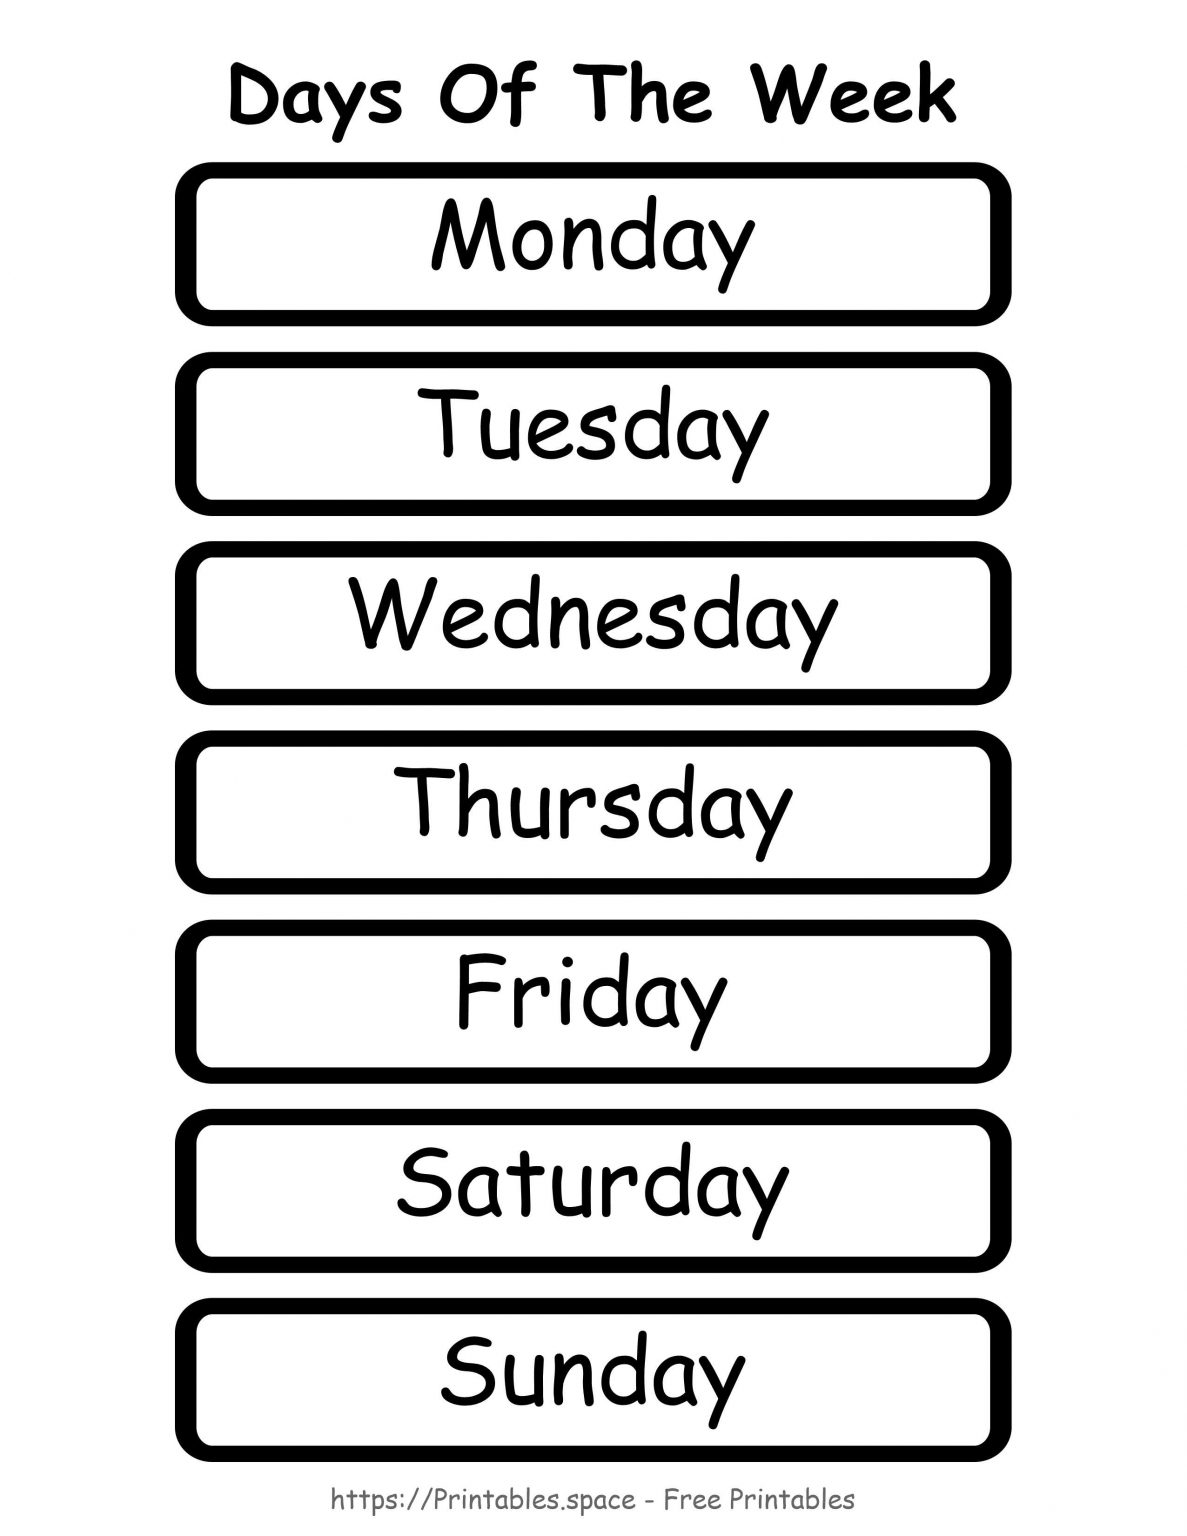 free-days-of-the-week-and-weather-wheel-printables